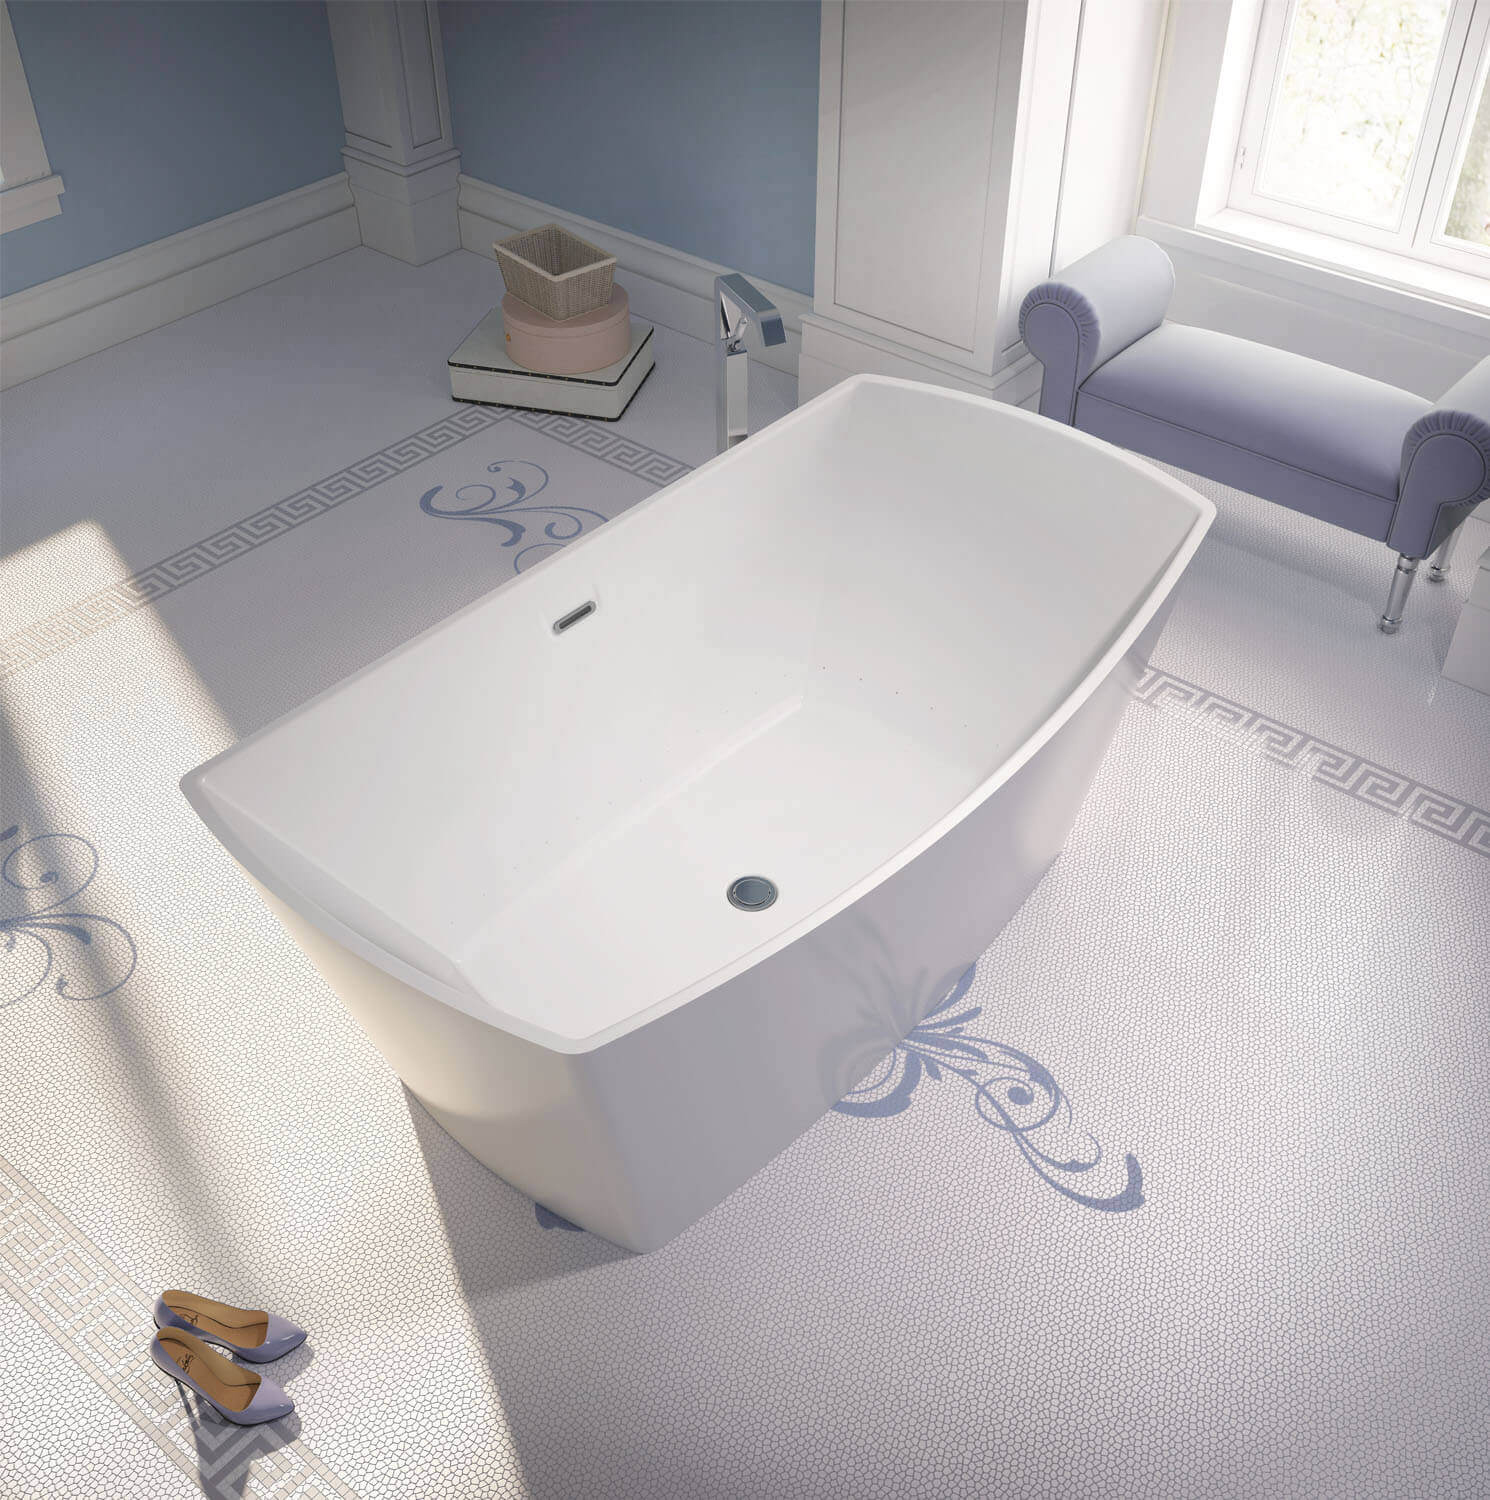 Bainultra Evanescence® 6634 two person freestanding air jet bathtub for your master bathroom